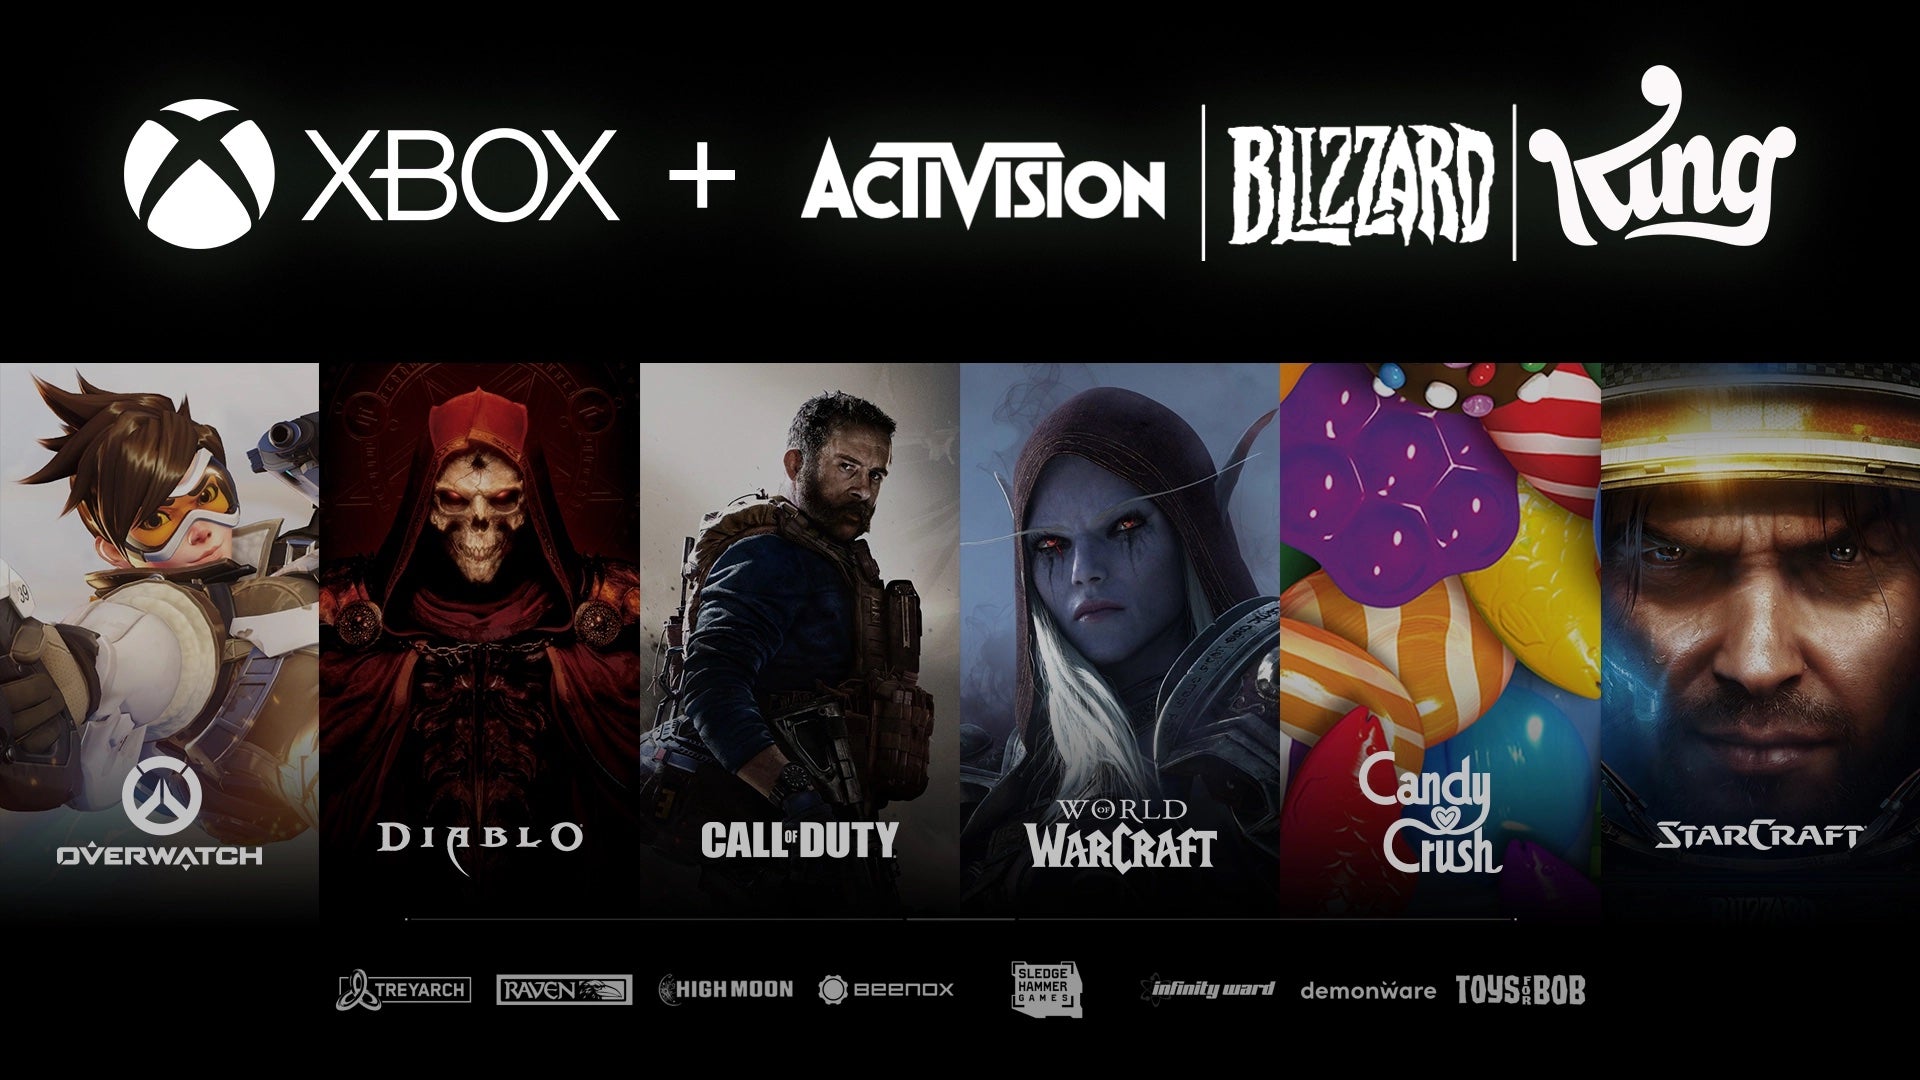 Image for Believe your eyes: Microsoft has agreed to acquire Activision Blizzard